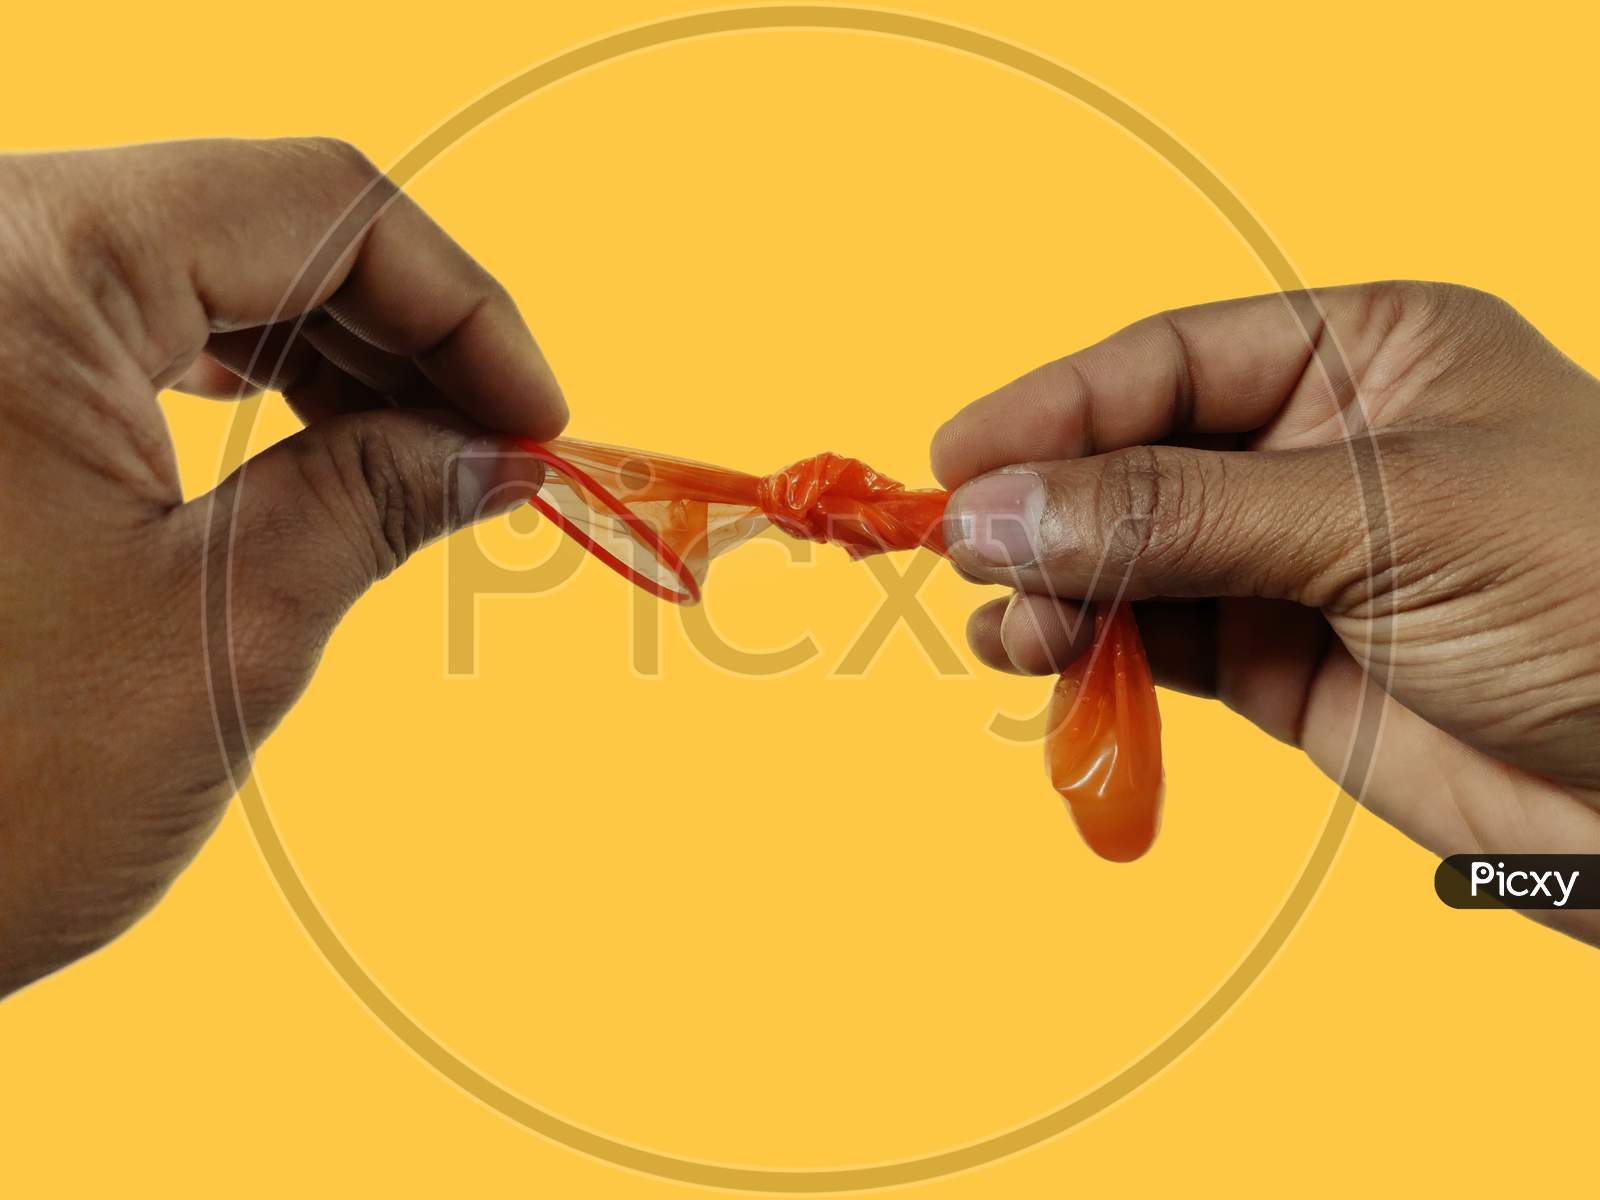 Condom end tie by hands  to prevent sperms fallout on yellow background with space for text.